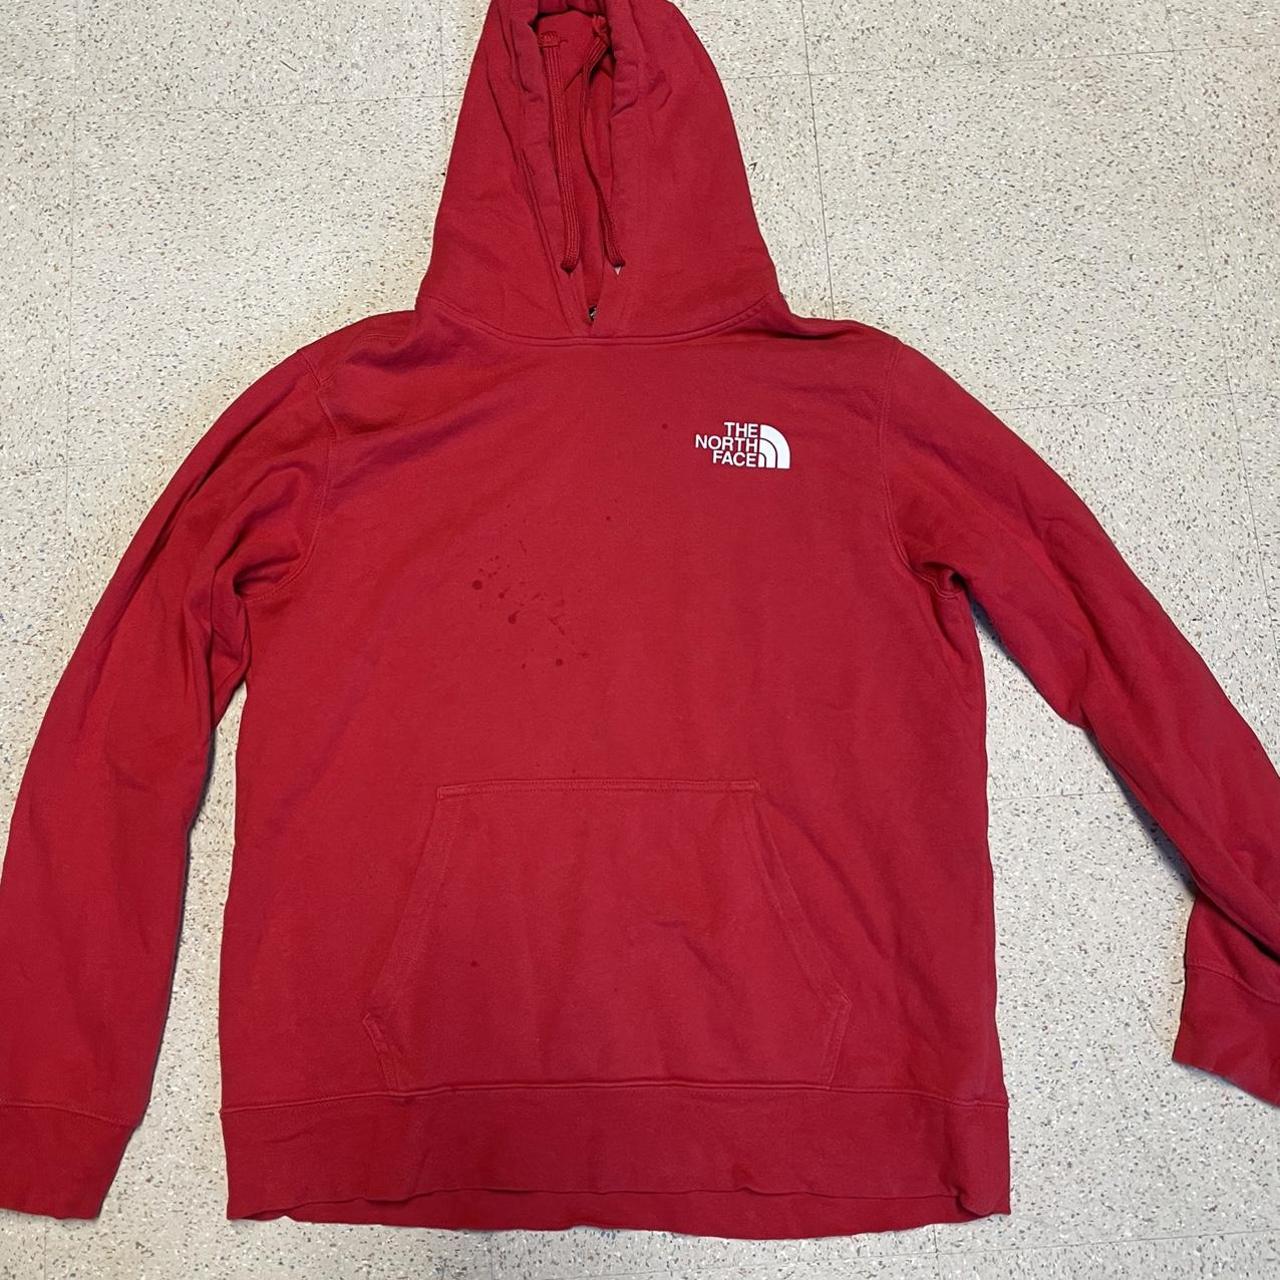 The North Face Hoodie Stains On Depop